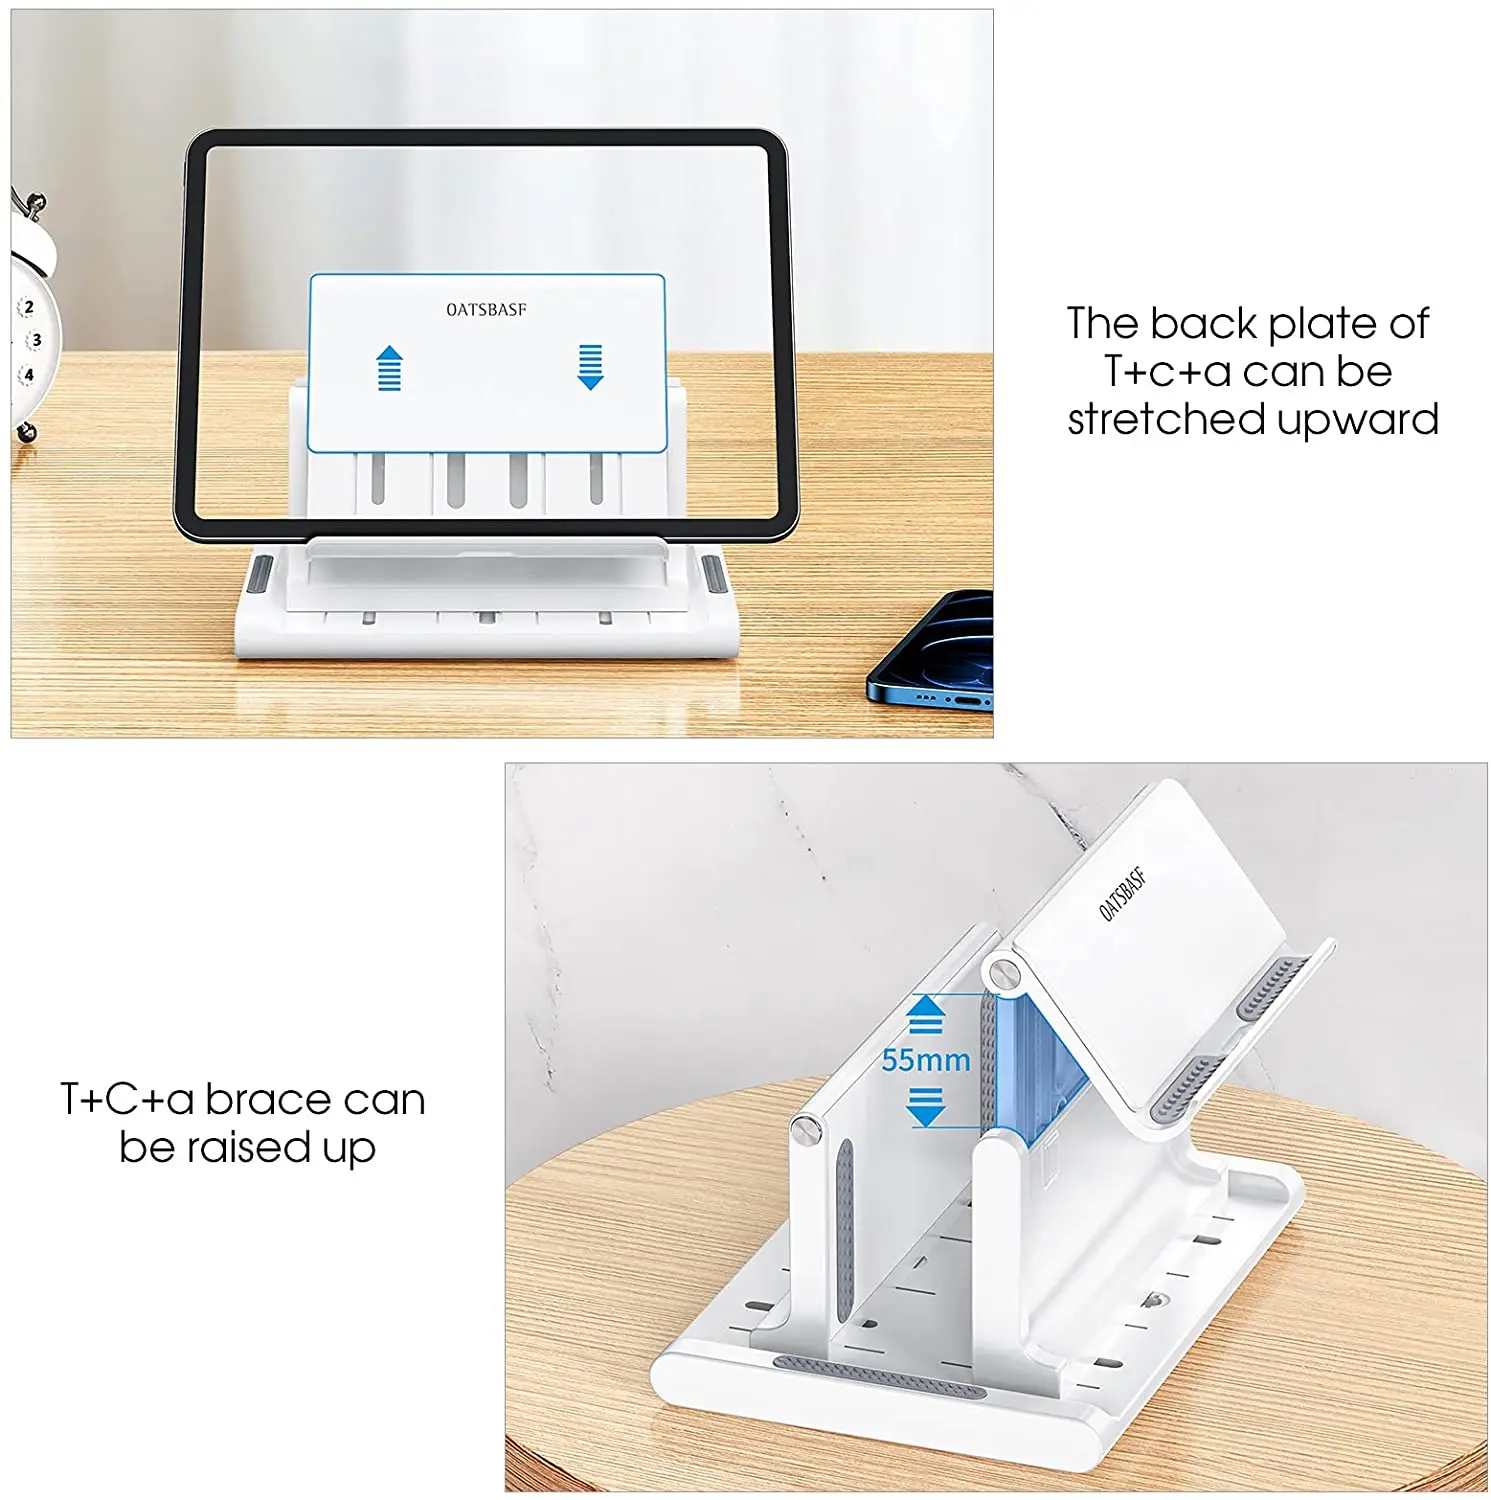 phone holder notebook holder ipad stand tablet stand adjustable desktop dock 3 in 1 space for macbook pro air mac xiaomi samsung free global shipping